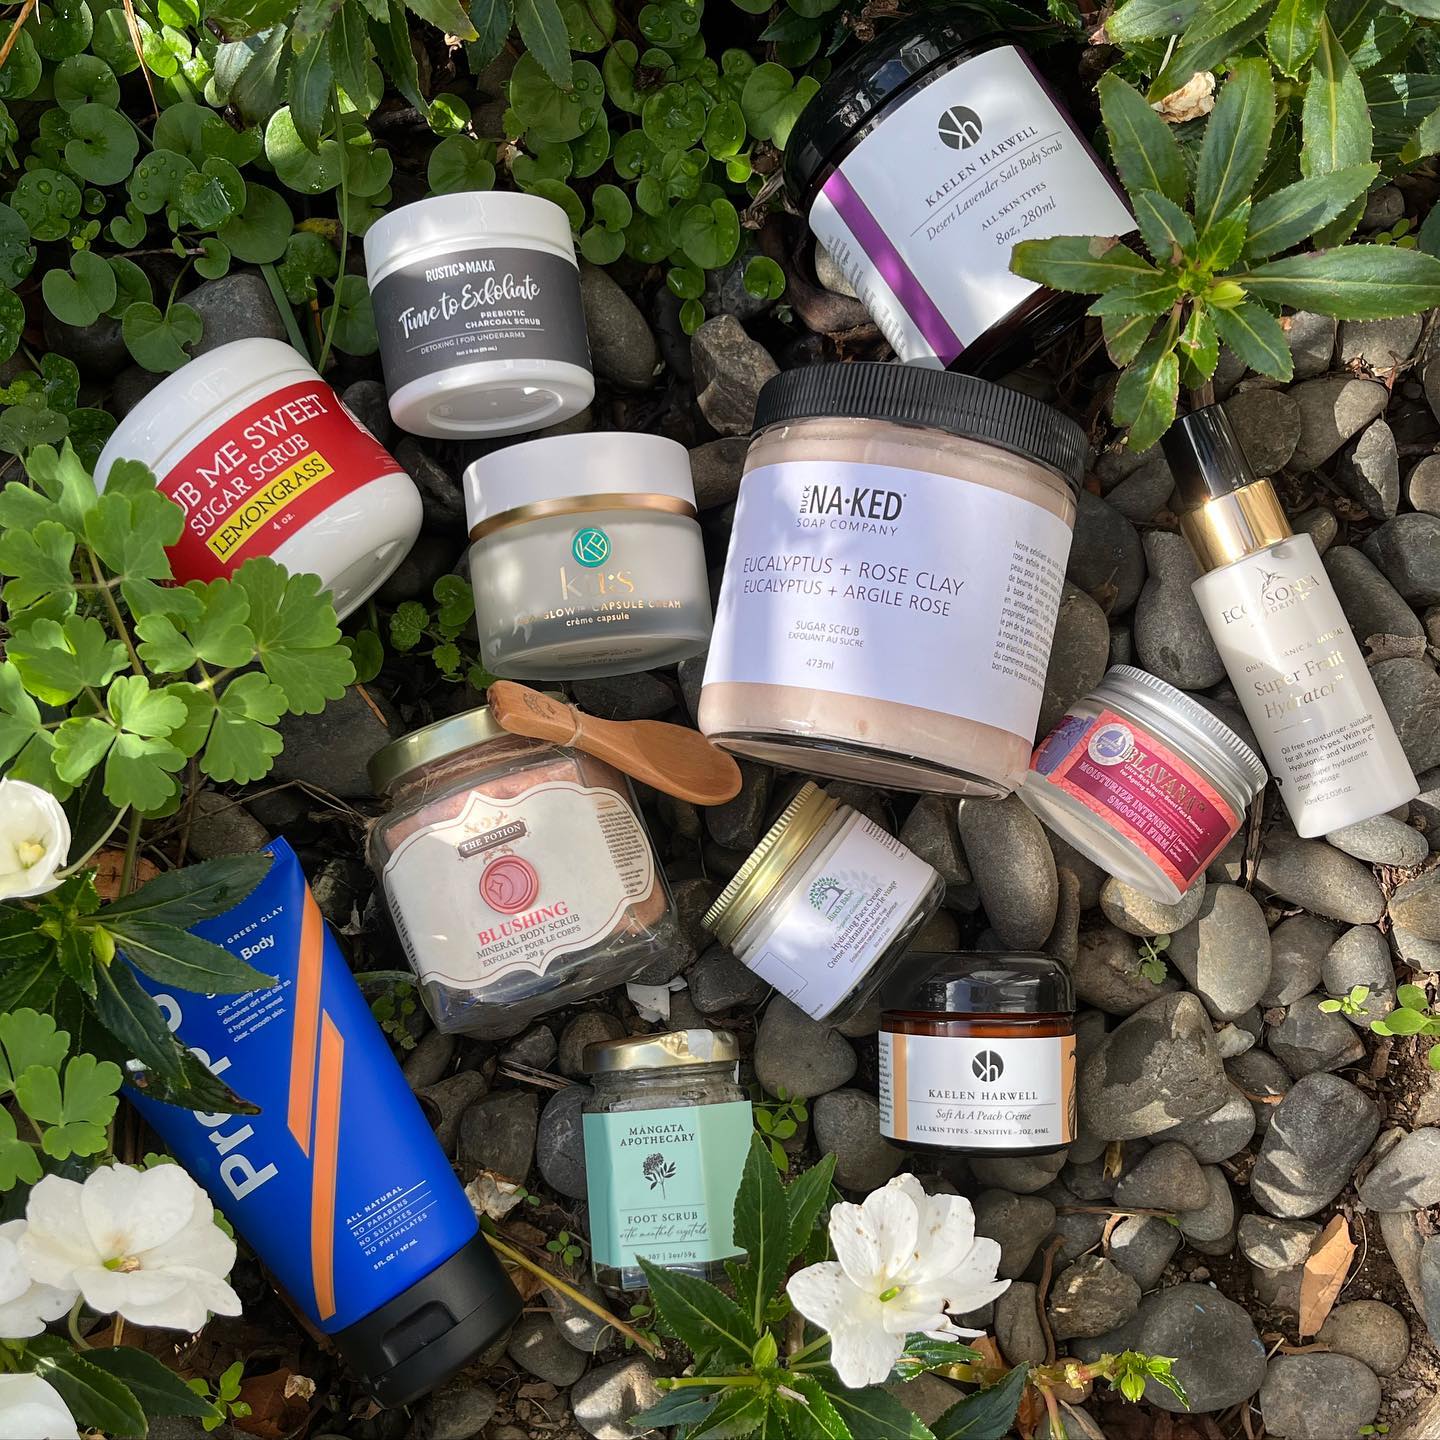 Tried and tested! The incredible scrubs and moisturisers I’ve been using and loving, as a judge of the 2022 @certclean Clean Beauty Awards 😍 Highly recommend adding @kaelenharwell @kusbeautyusa @ecobysonya @birchbabe @natural_red_ @thepotionmasters @rusticmaka @prepuproducts @mangataapothecary @bucknakedsoapcompany to your self-care routine.
.
.
.
#cleanbeautyawards #beautyawards #certclean #beauty #beautyproducts #loveselfcare #selfcare #ecobeauty #ecobeautyeditor #shannondunn #journalist #writer #shineyourlight